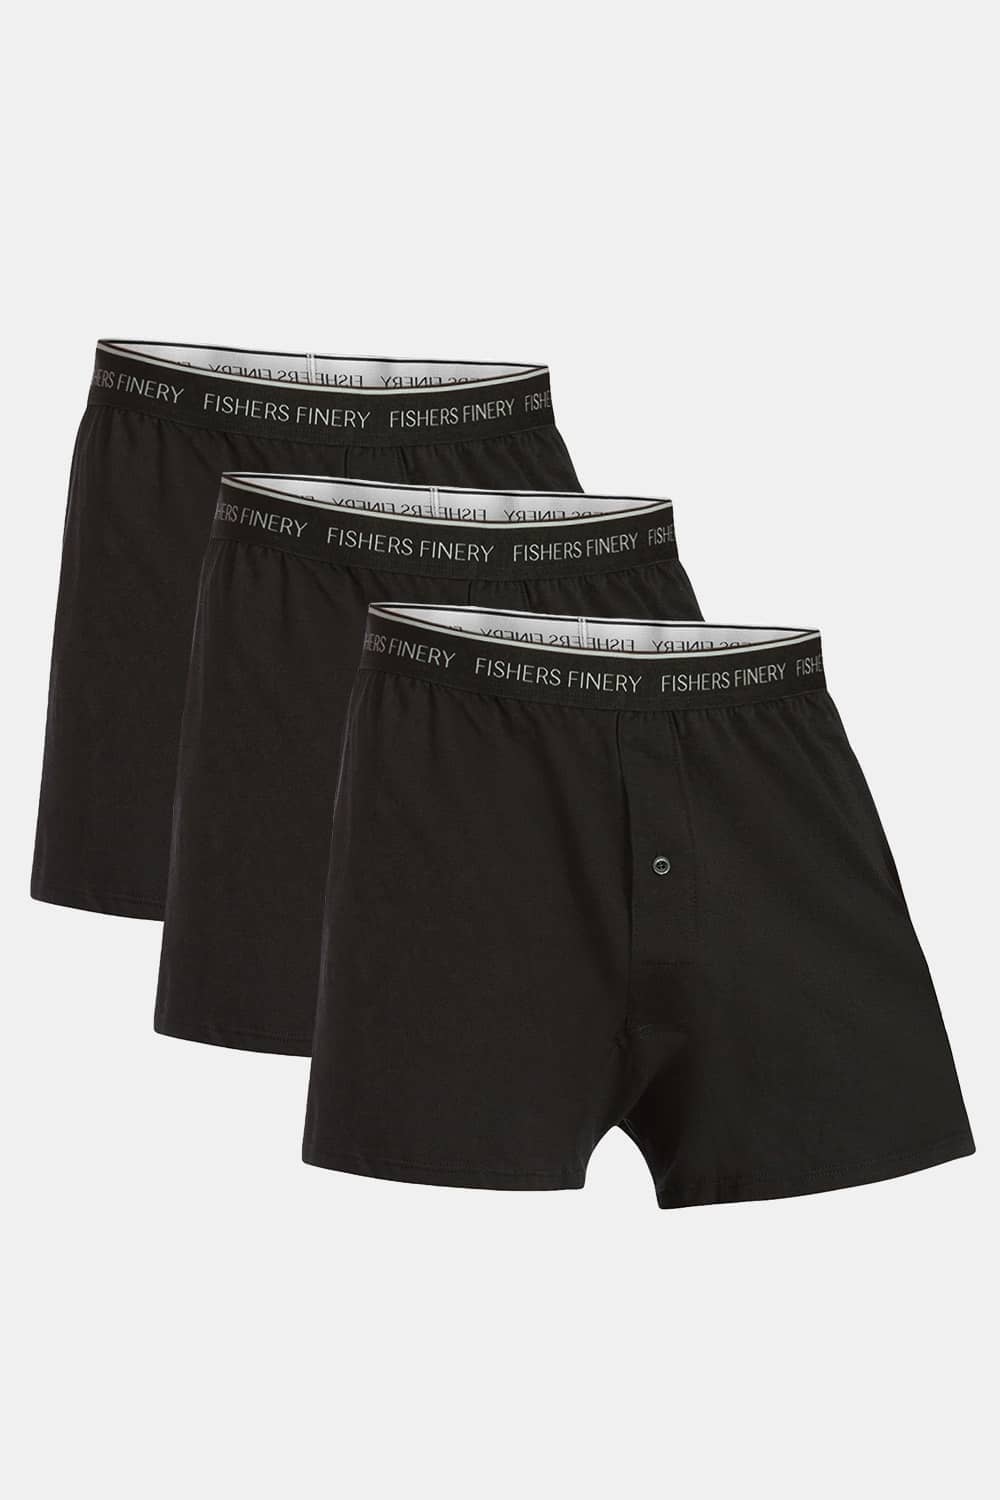 Men's Relaxed Fit Soft Knit Boxer - Multi Pack Options Mens>Underwear Fishers Finery Black Small 3 Pack